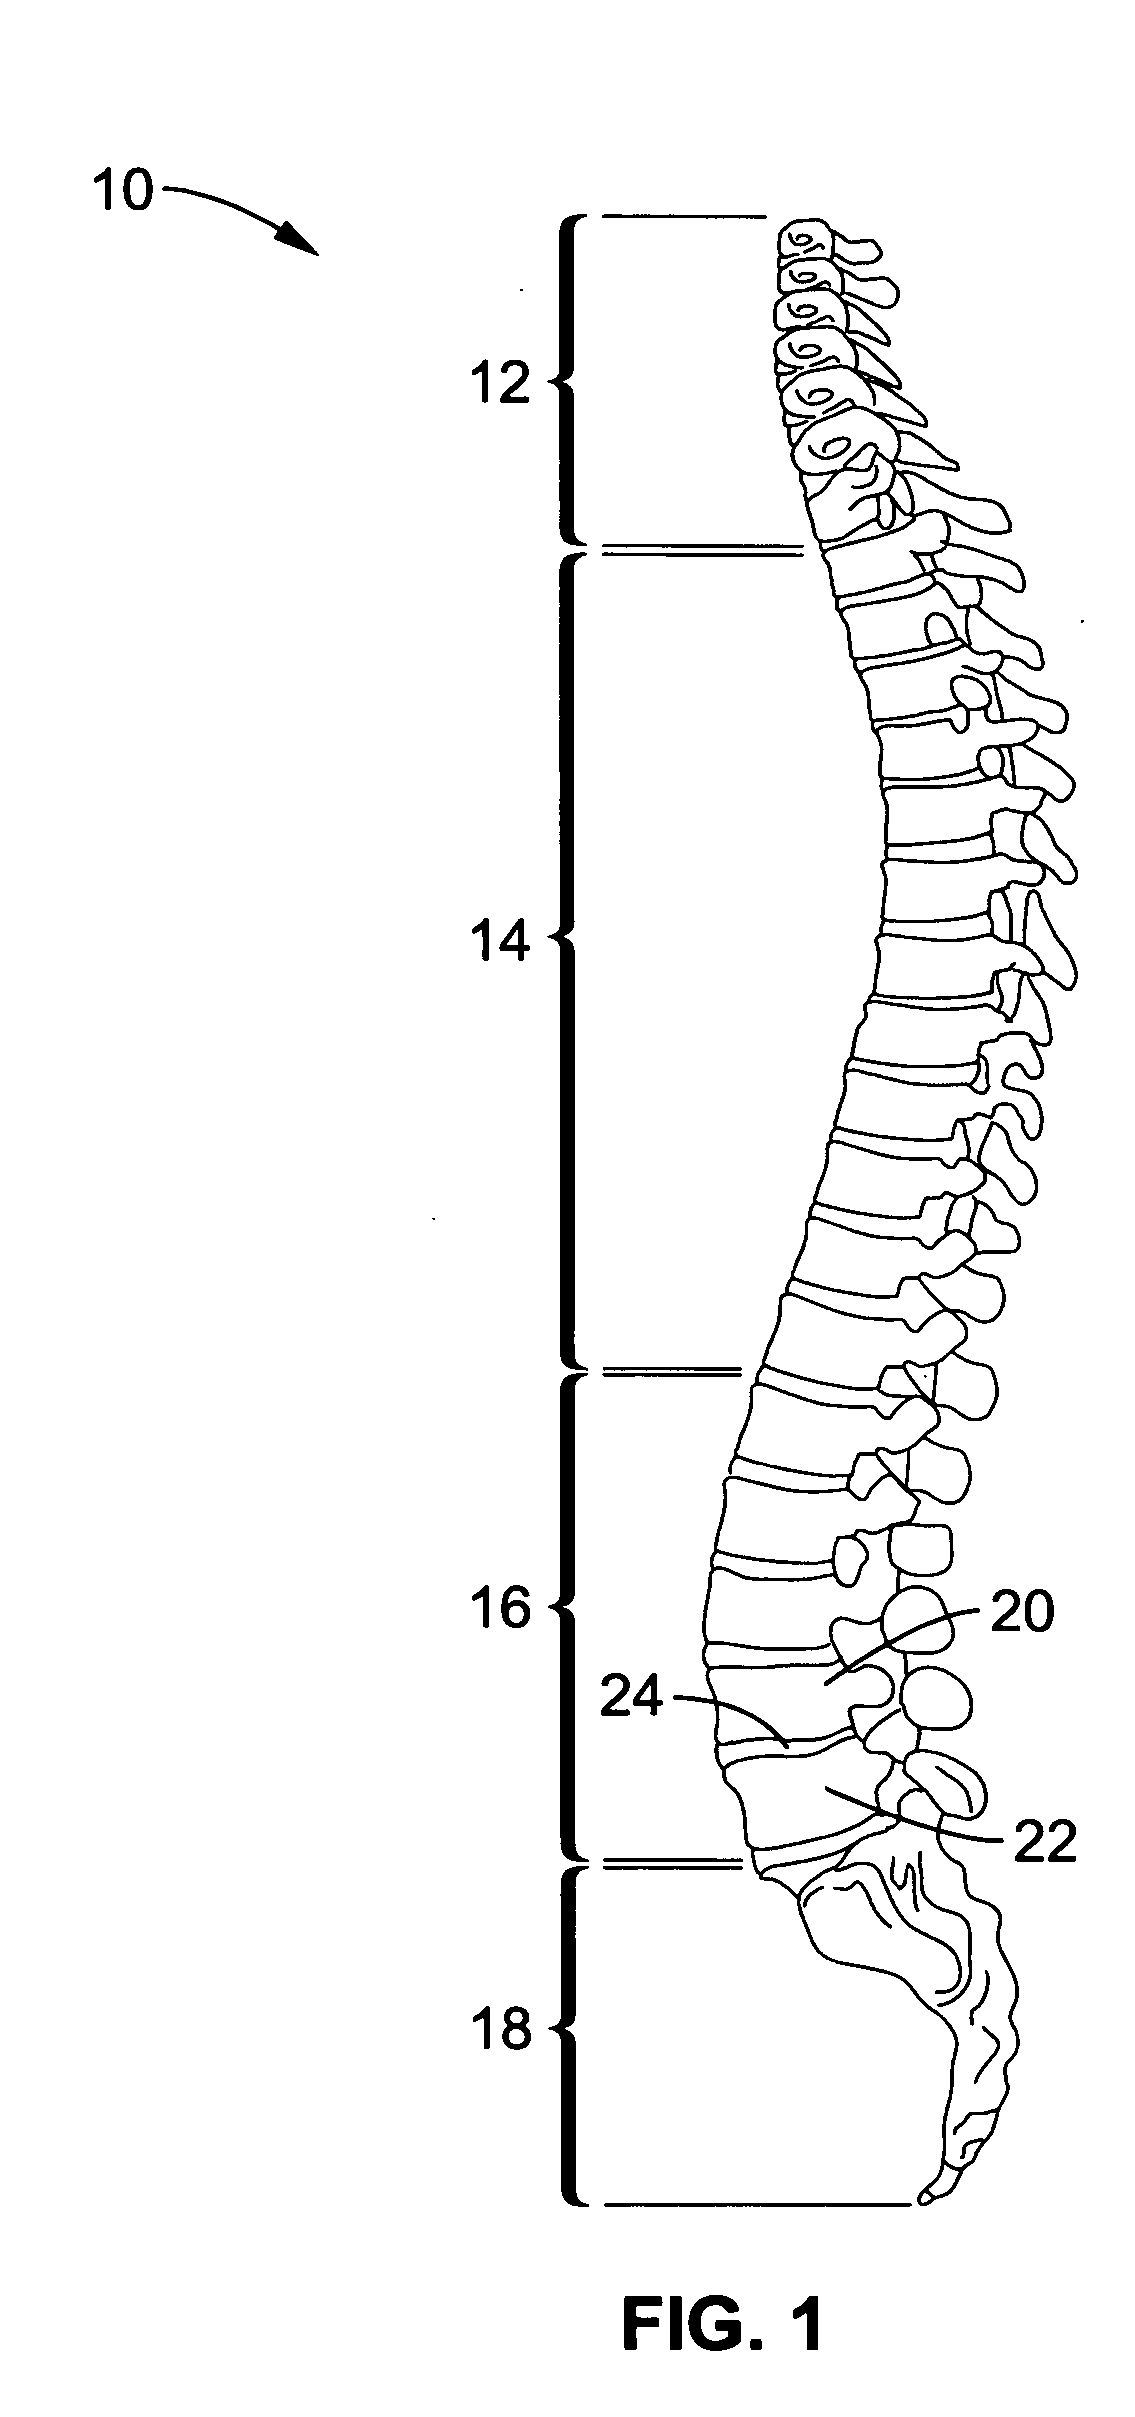 Spine microsurgery techniques, training aids and implants